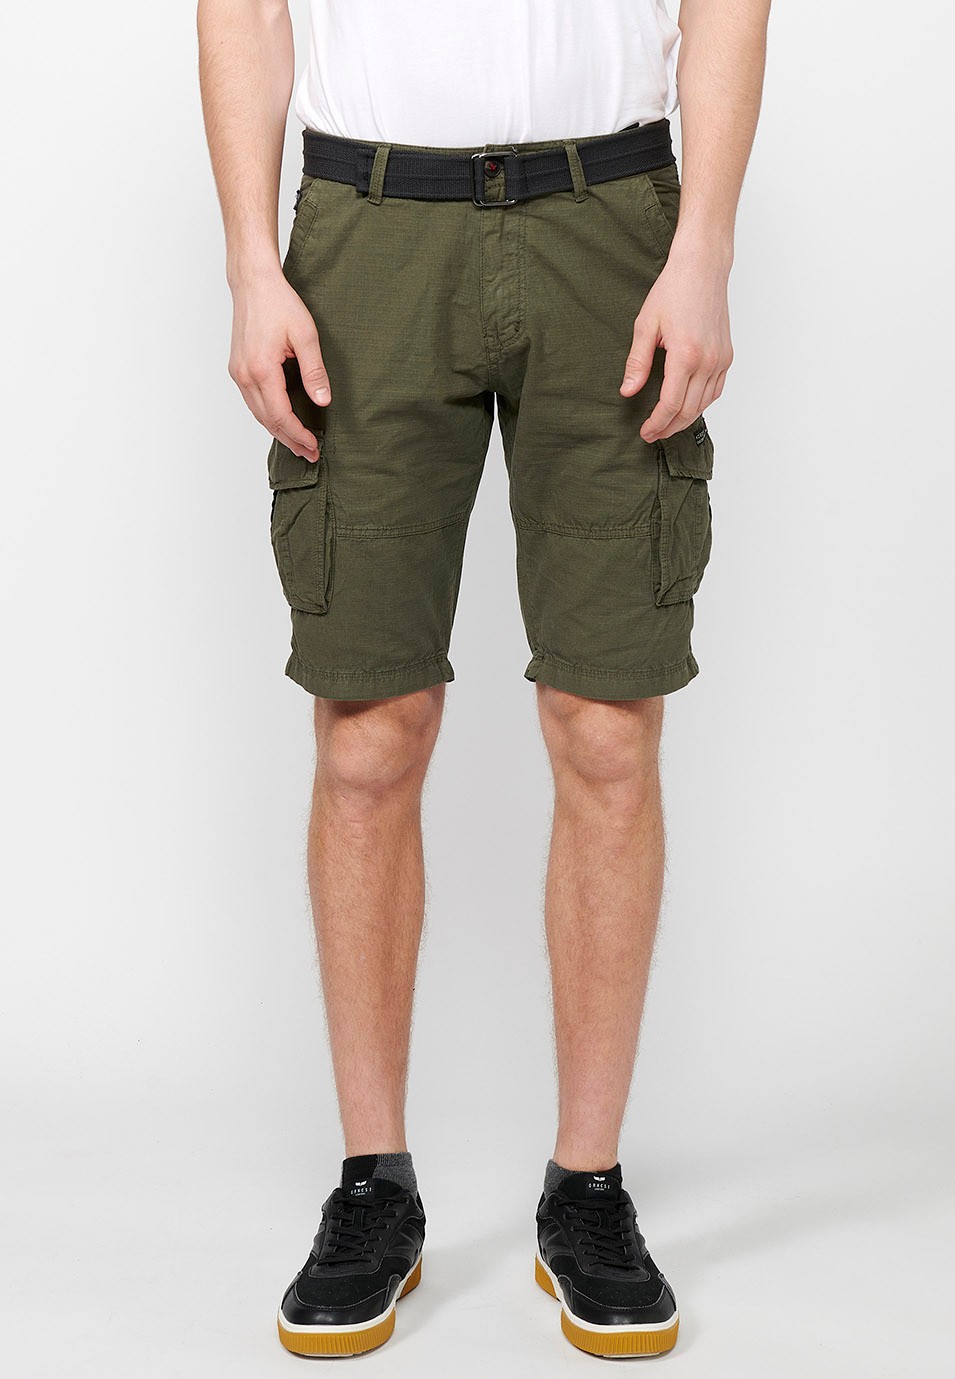 Cotton cargo shorts with belt and front closure with zipper and button with pockets, two back pockets with flap and two green cargo pants for Men 4